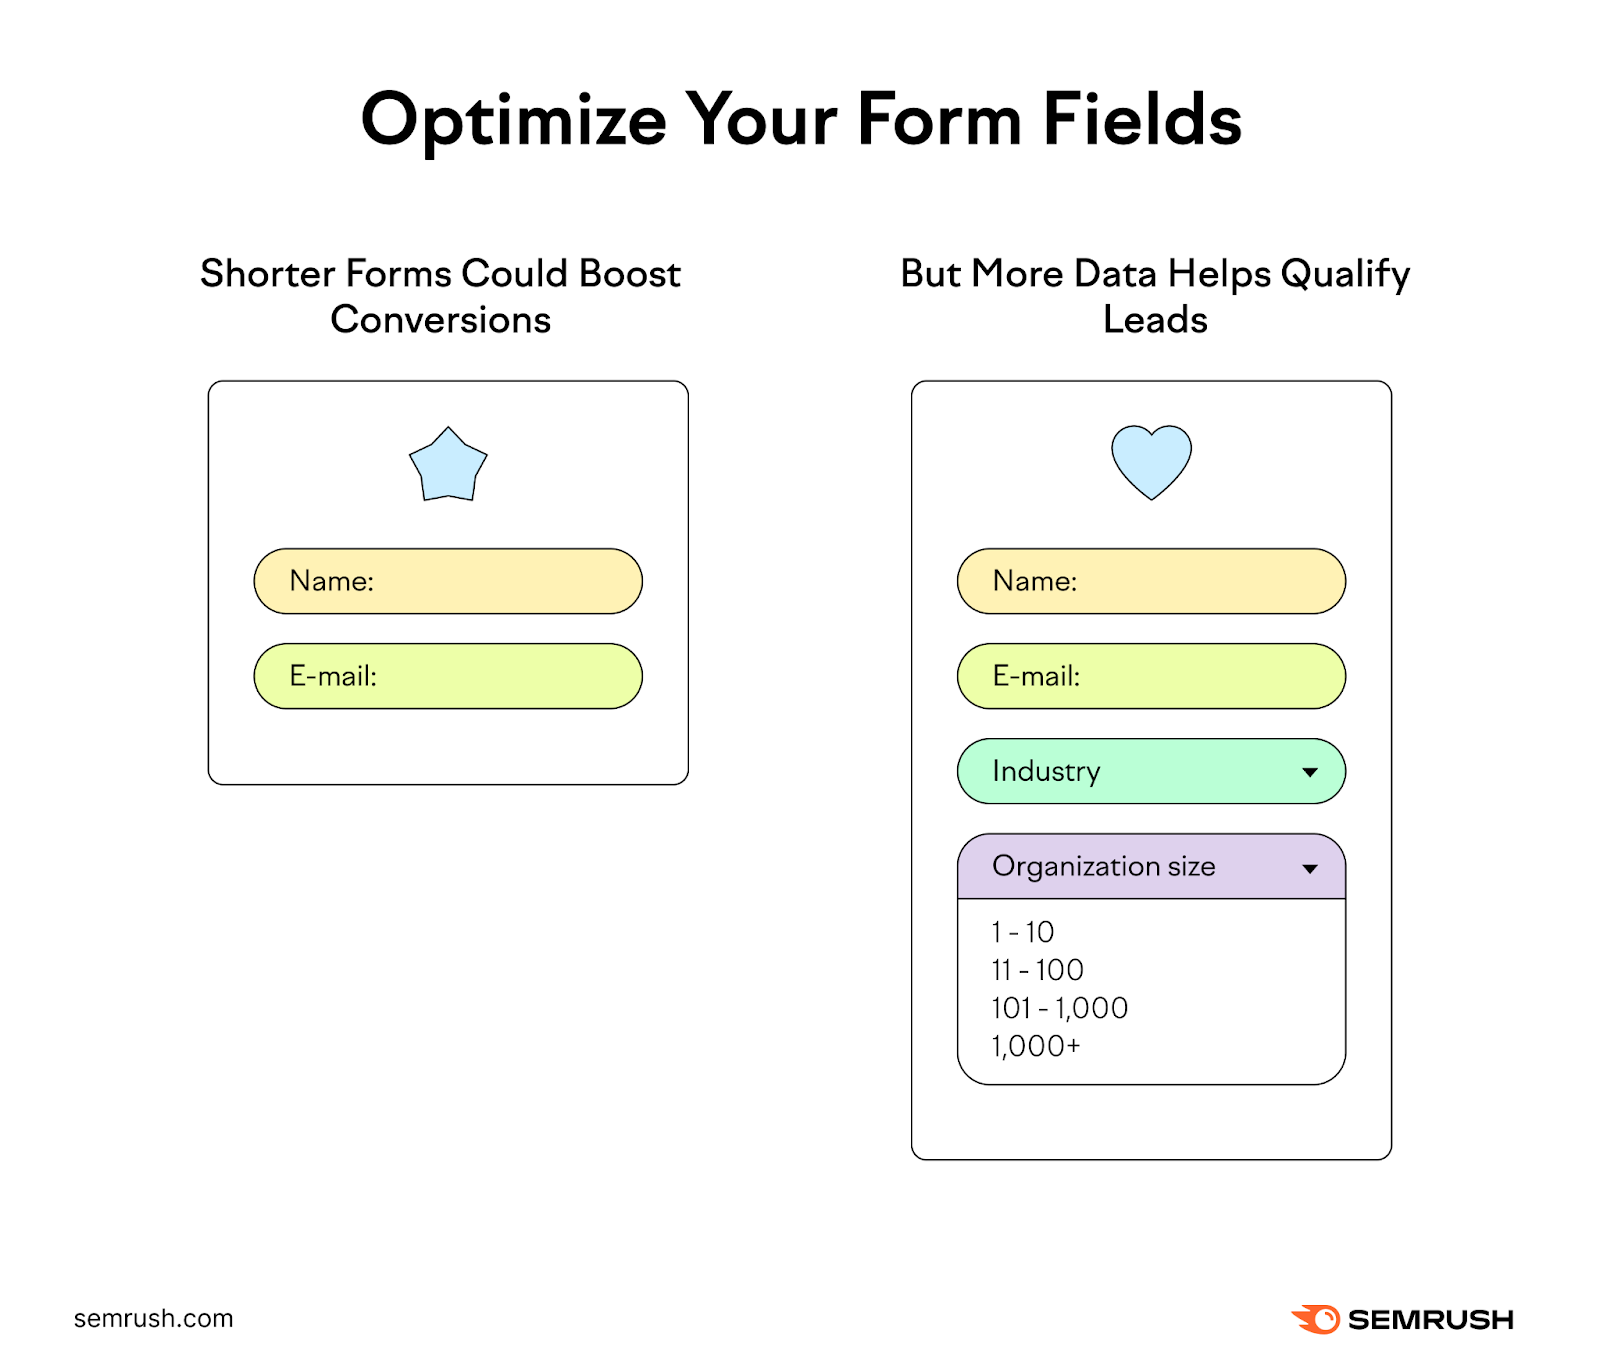 An infographic showing a short form (left) which could boost conversions and a long form (right) which helps gain more data and qualify leads